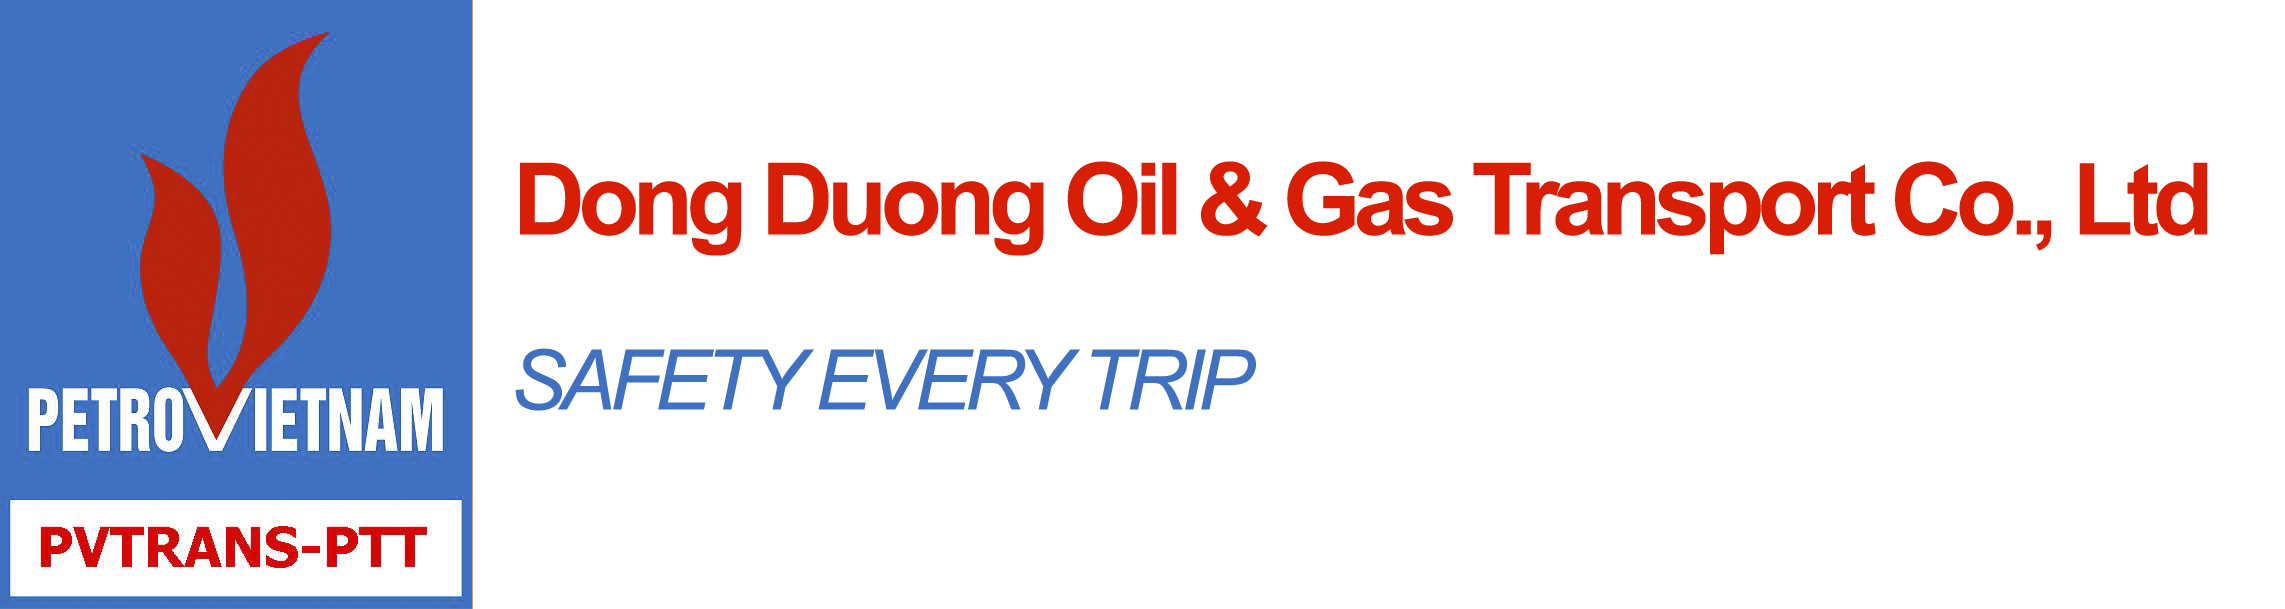 Indochina Petroleum Transport Joint Stock Company announces the sale and liquidation of 37 office cars for lease